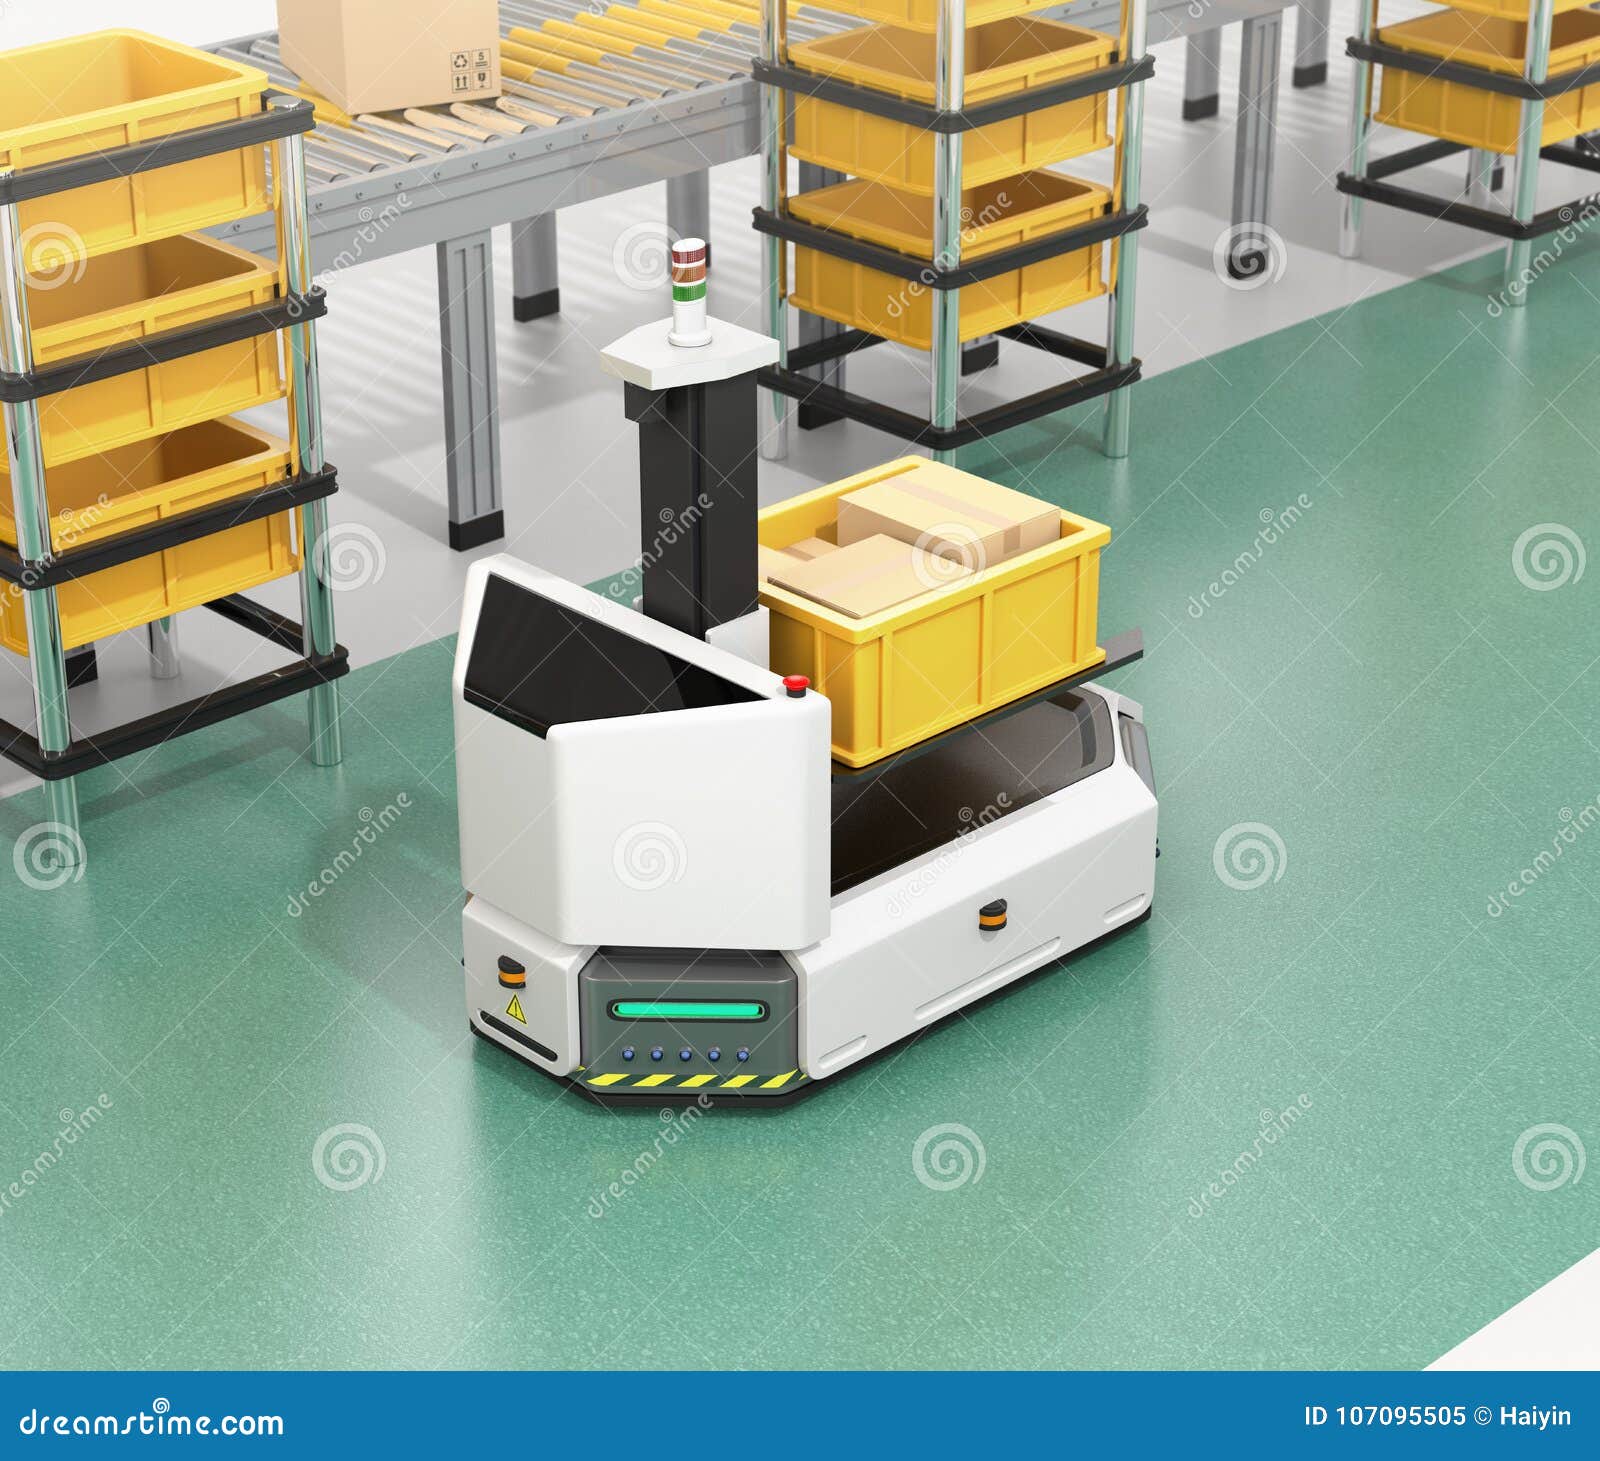 Self Driving Agv With Forklift Carrying Container Box Beside Conveyor Stock Illustration Illustration Of Indicator Concept 107095505